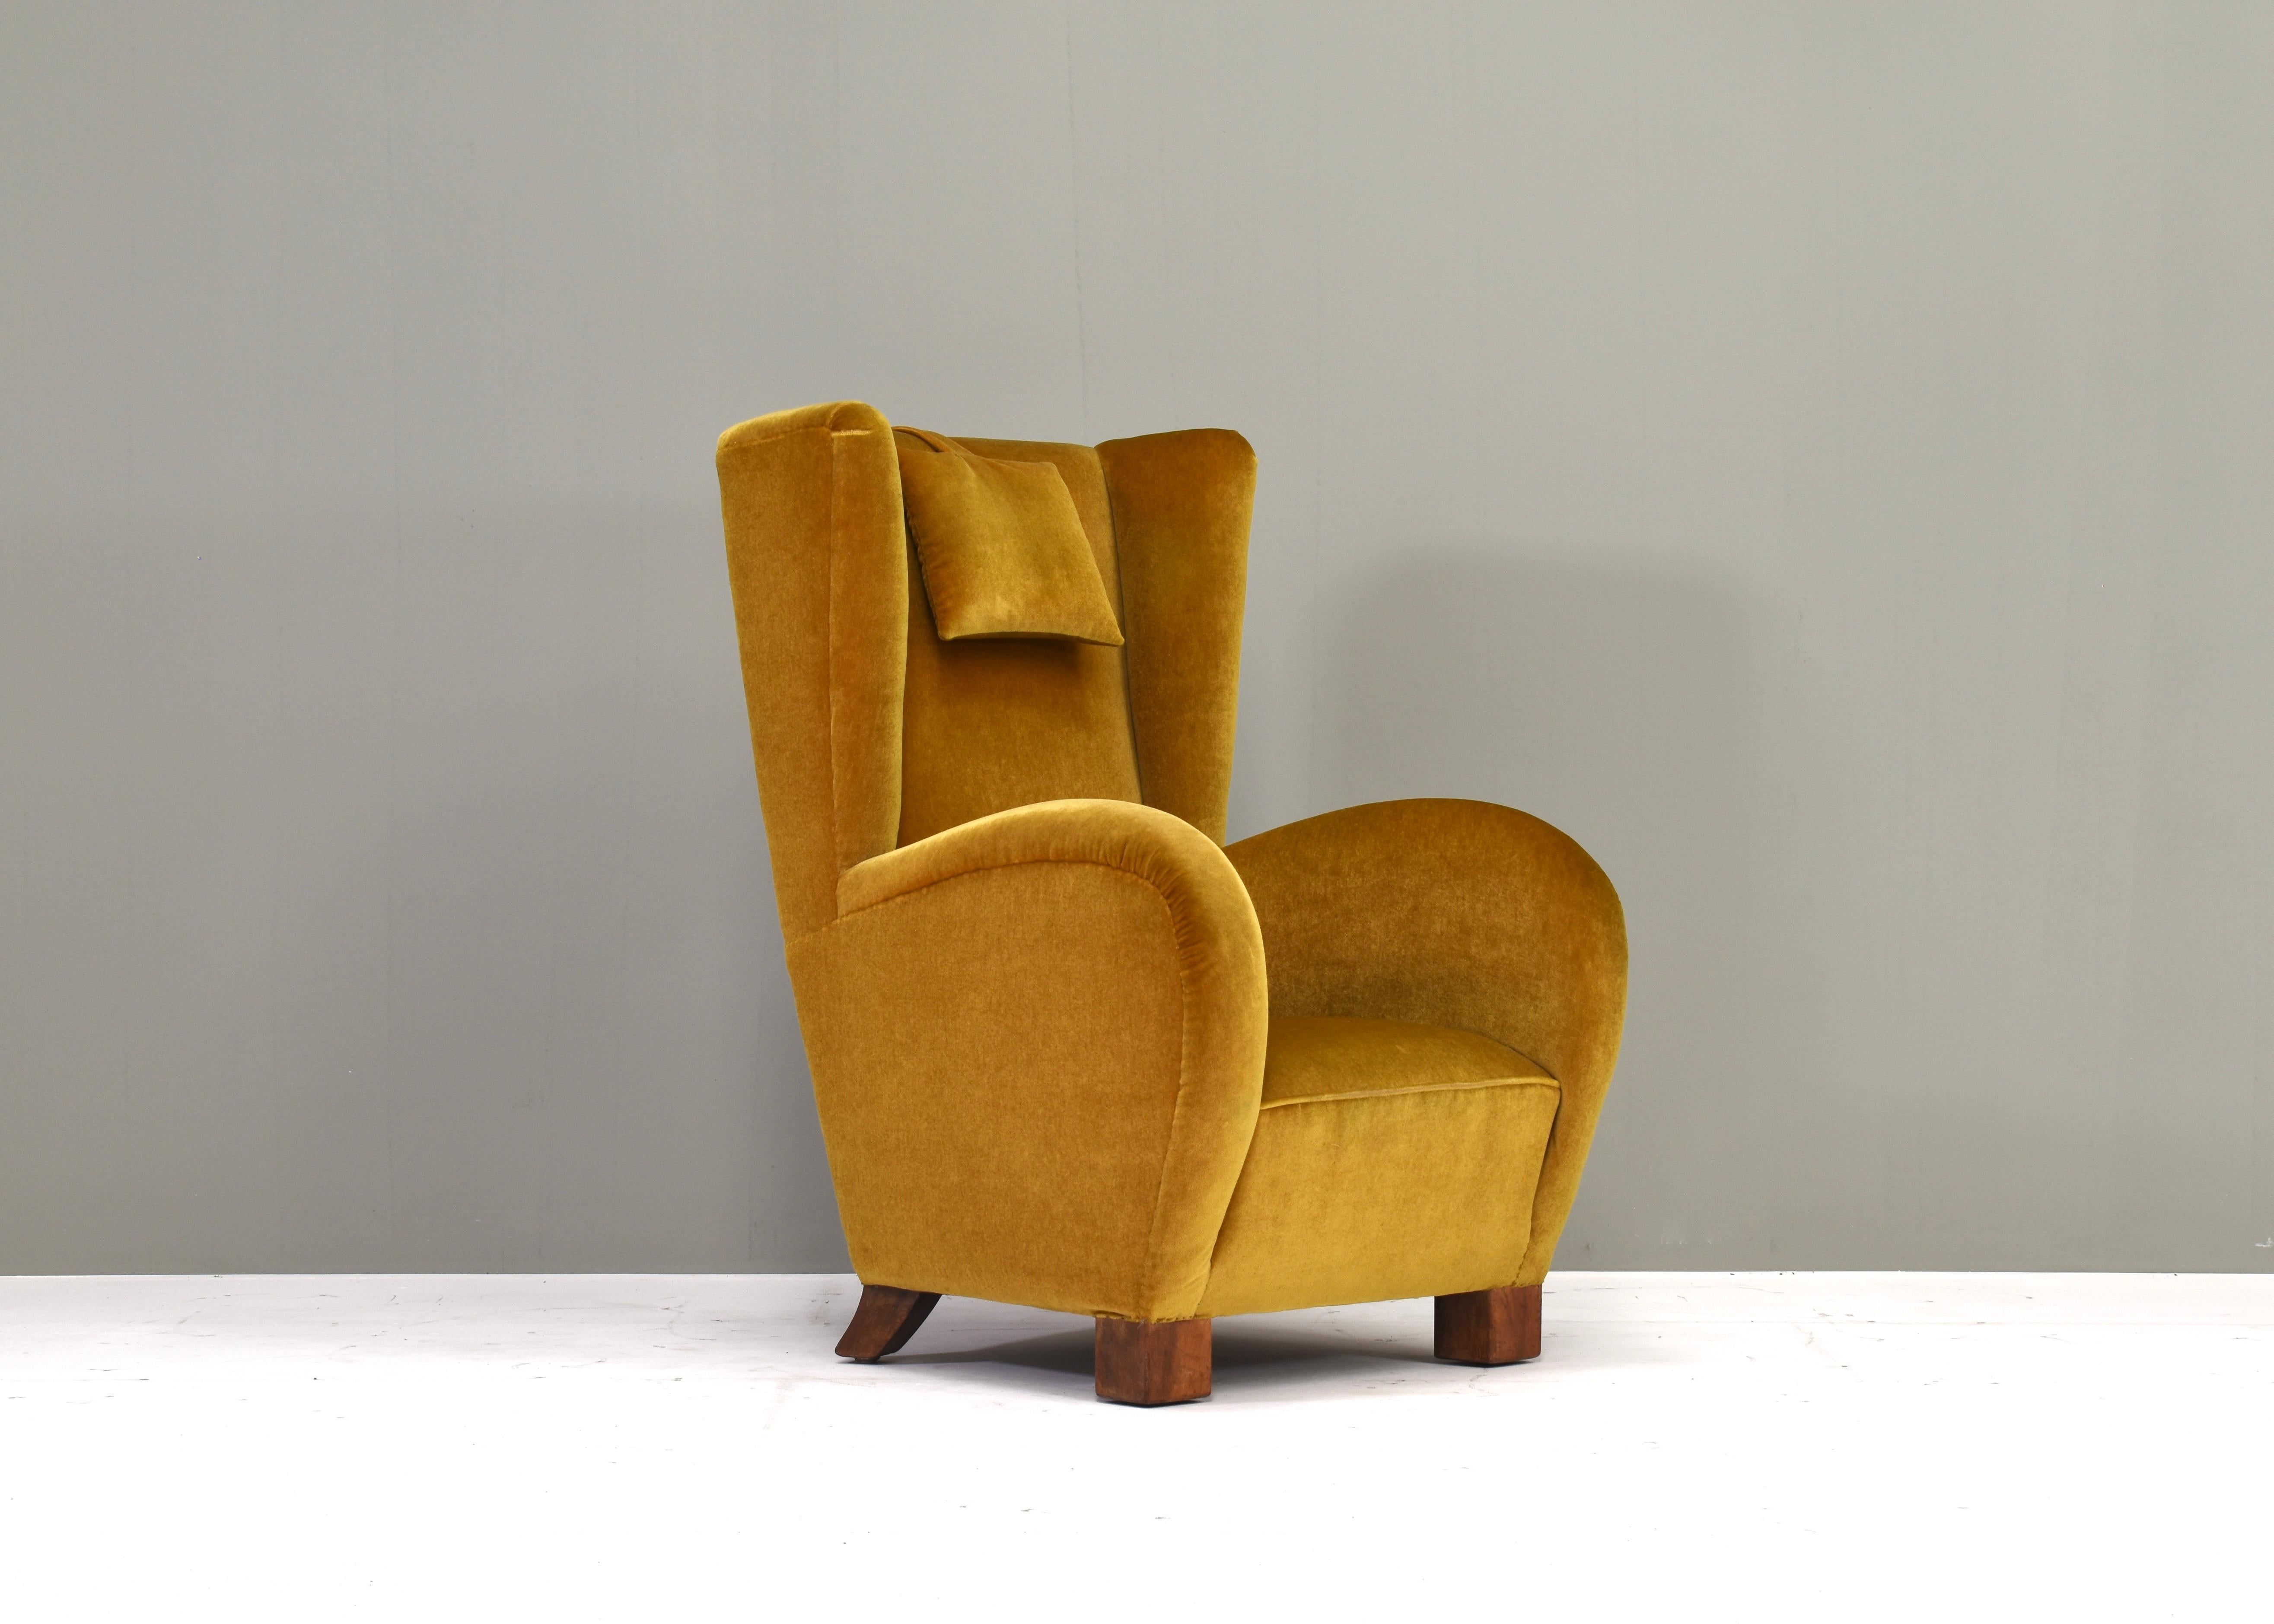 Art Deco wingback armchair in oker mohair velvet with solid wood feet, circa 1930’s.
In very good condition.
Designer: Unknown
Manufacturer: Unknown
Model: Wingback armchair
Color: Oker
Material: Mohair velvet / solid wood
Size WxDxH: